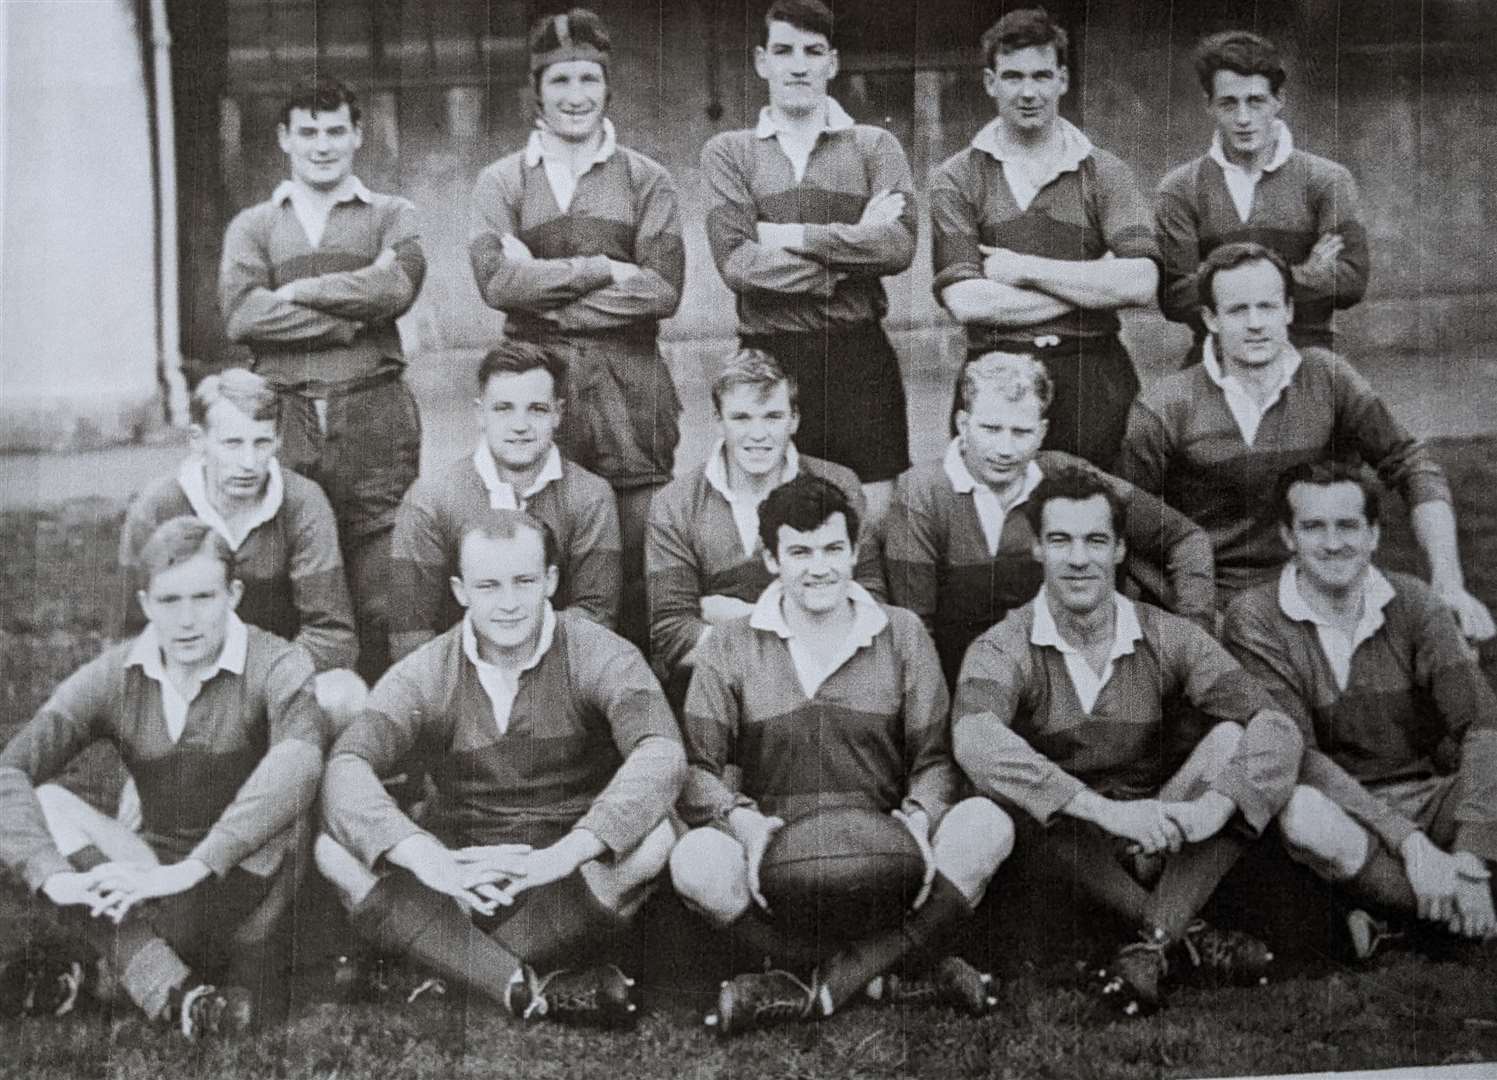 Highland RFC players from the early 1960s.